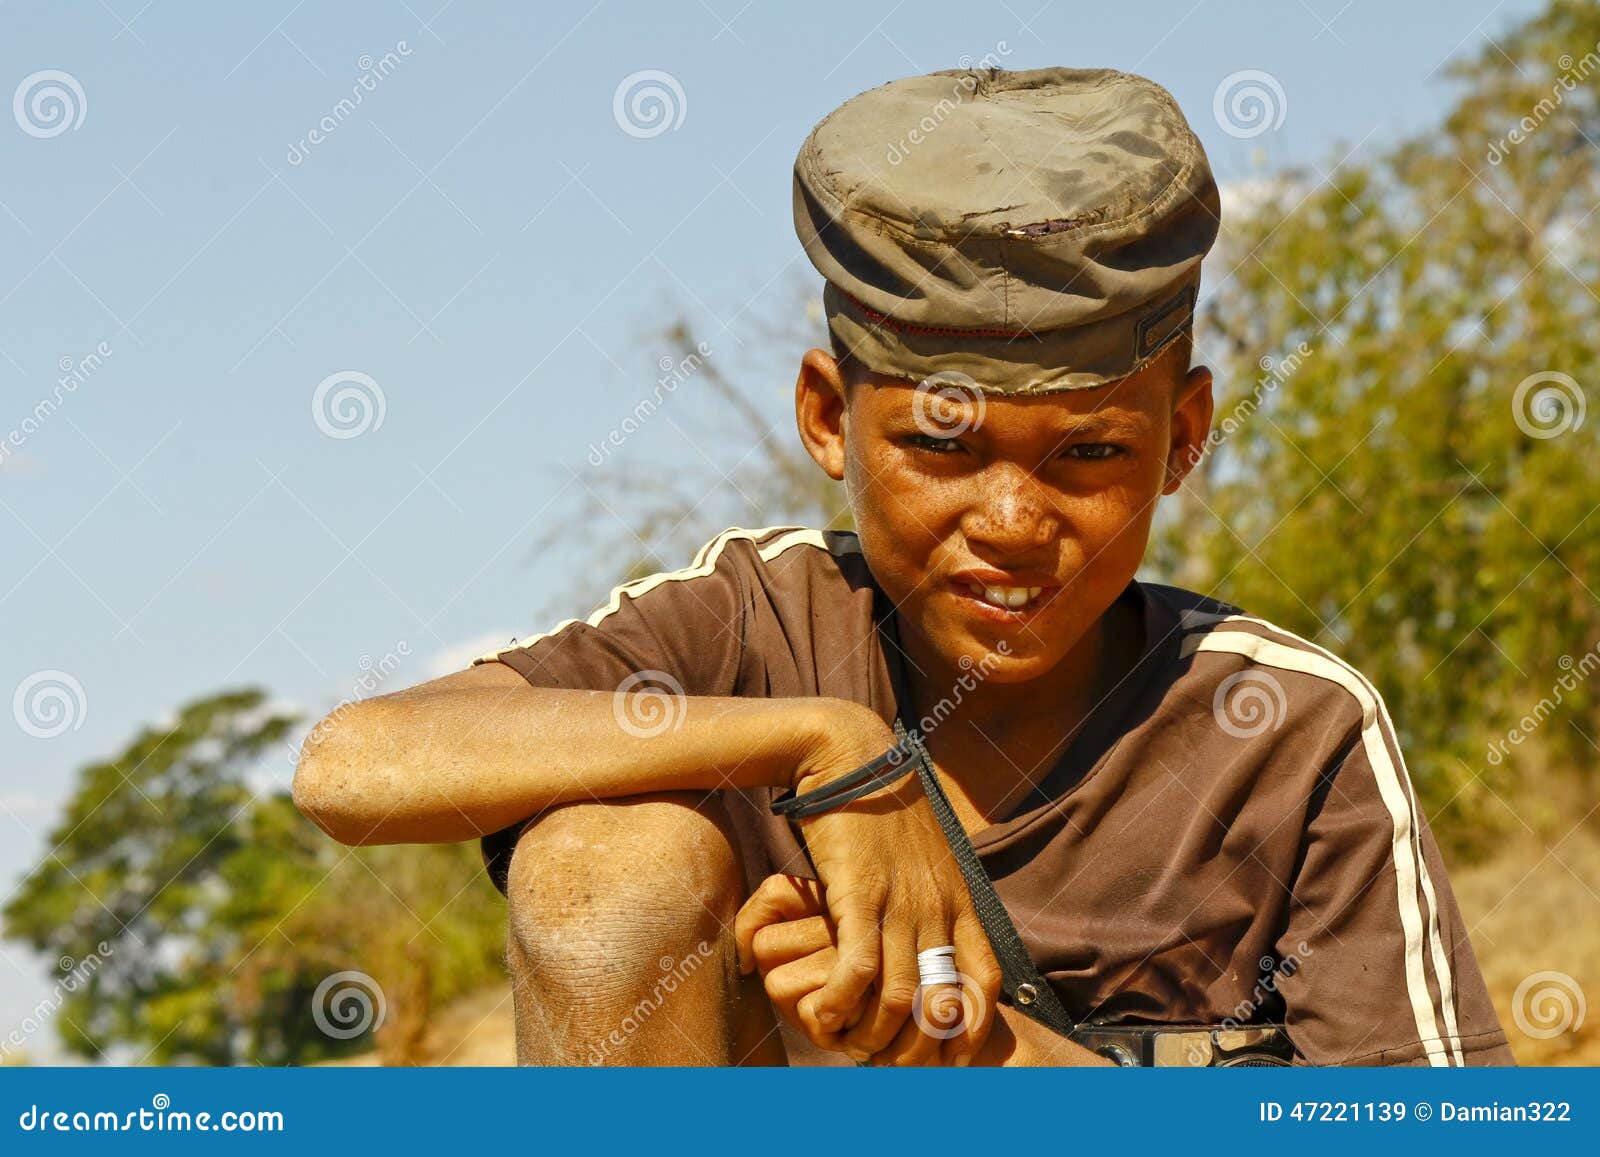 Photo of Adorable Young Happy Boy - African Poor Child Stock Image ...